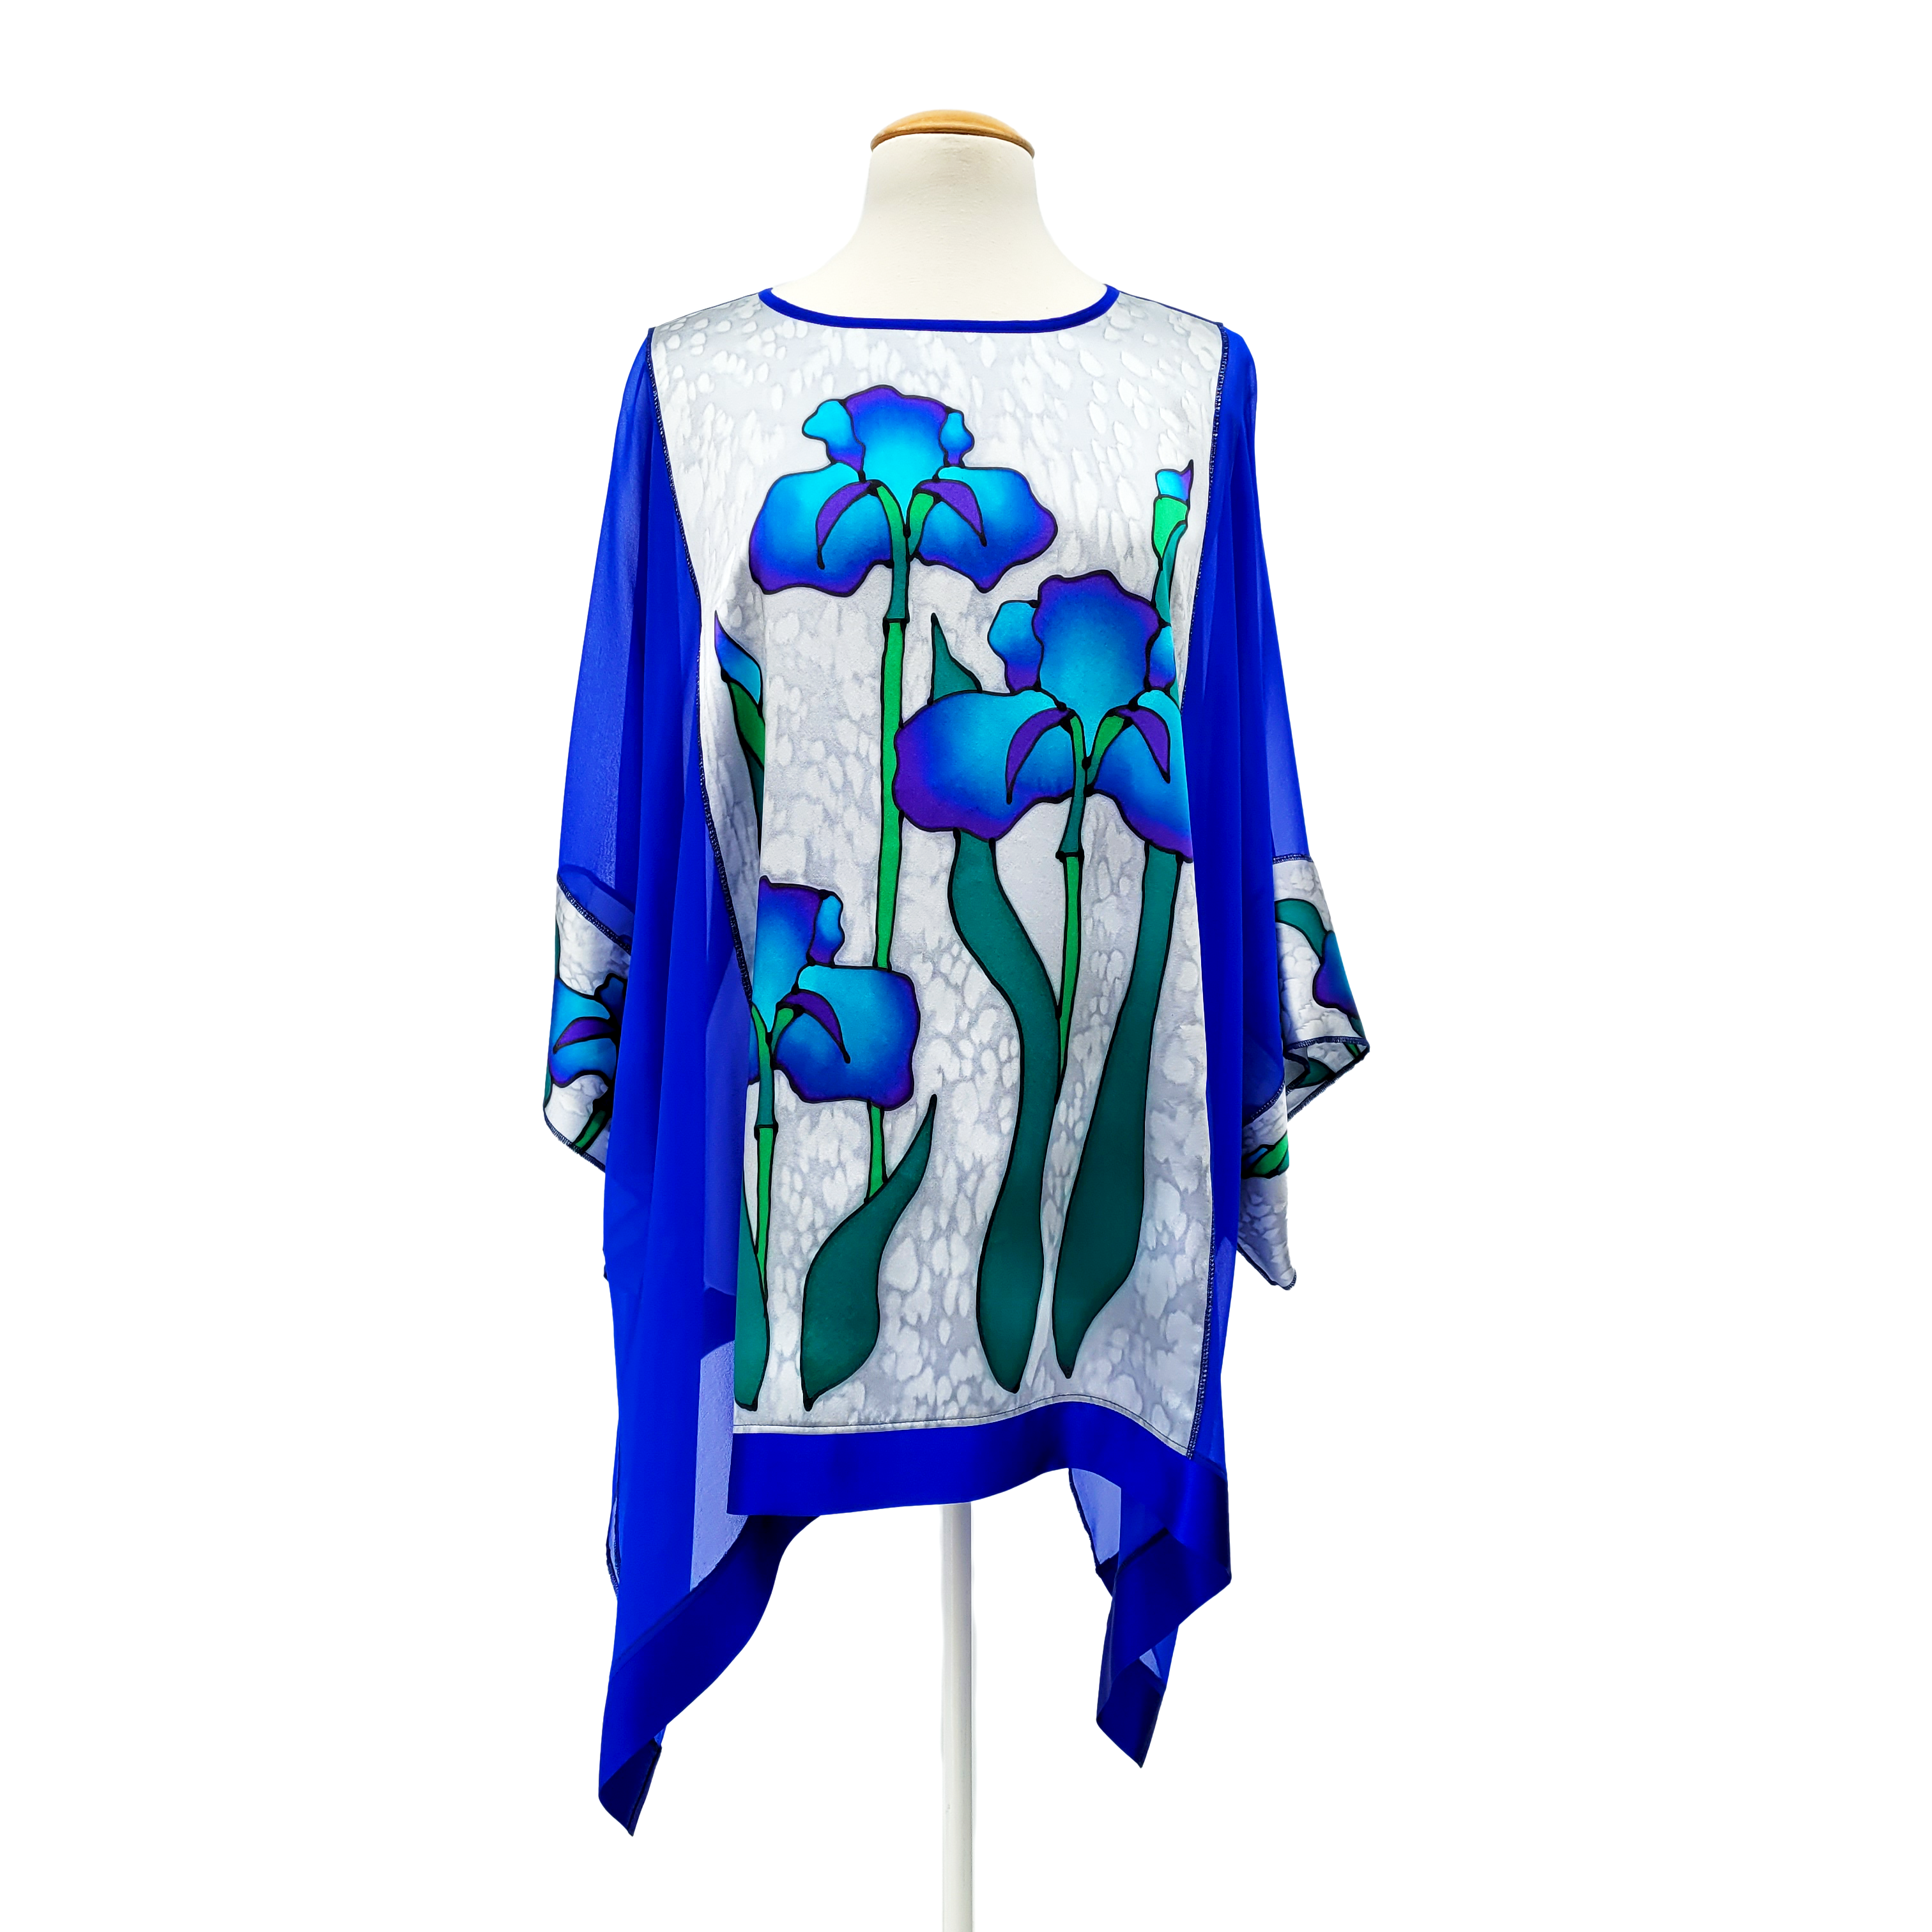 iris art design in silver and royal blue hand painted pure silk one size ladies top hand made by Lynne Kiel